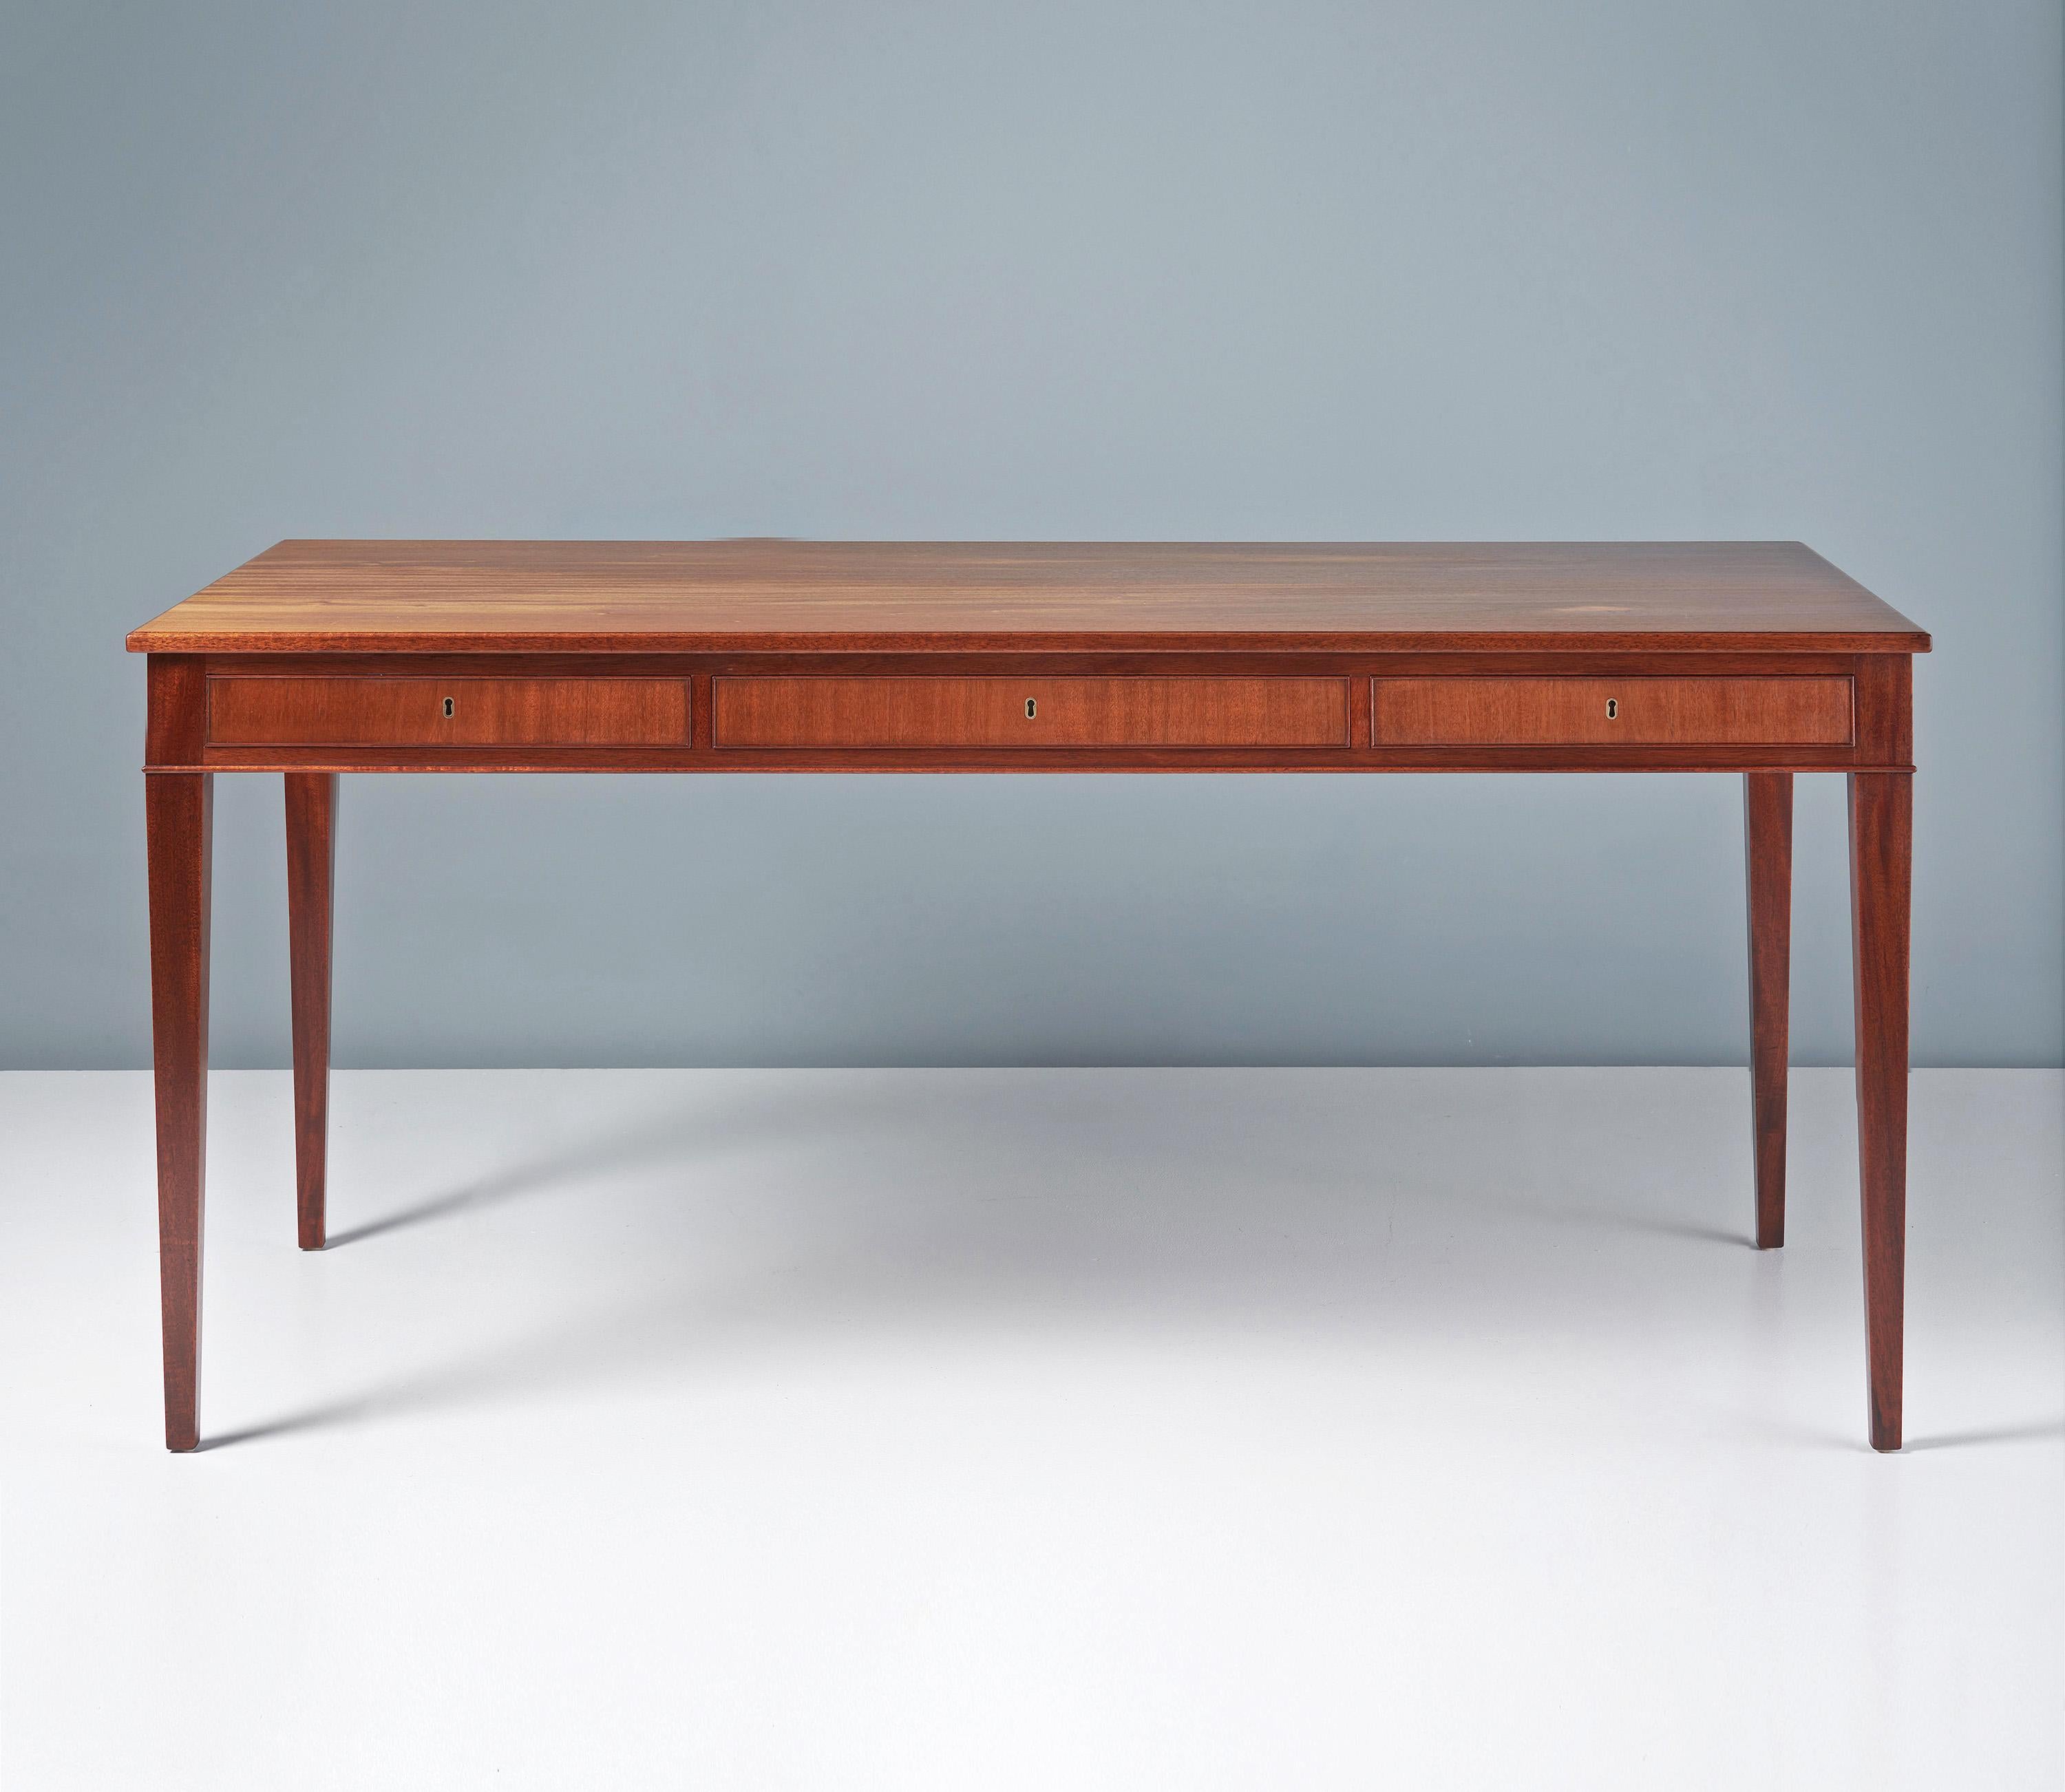 Frits Henningsen - Writing Desk, c1940s

Rarely seen design from the master cabinetmaker of the early Danish Modern period: Frits Henningsen. Henningsen produced all of his designs at his own workshop in limited volumes. This exquisite, classical